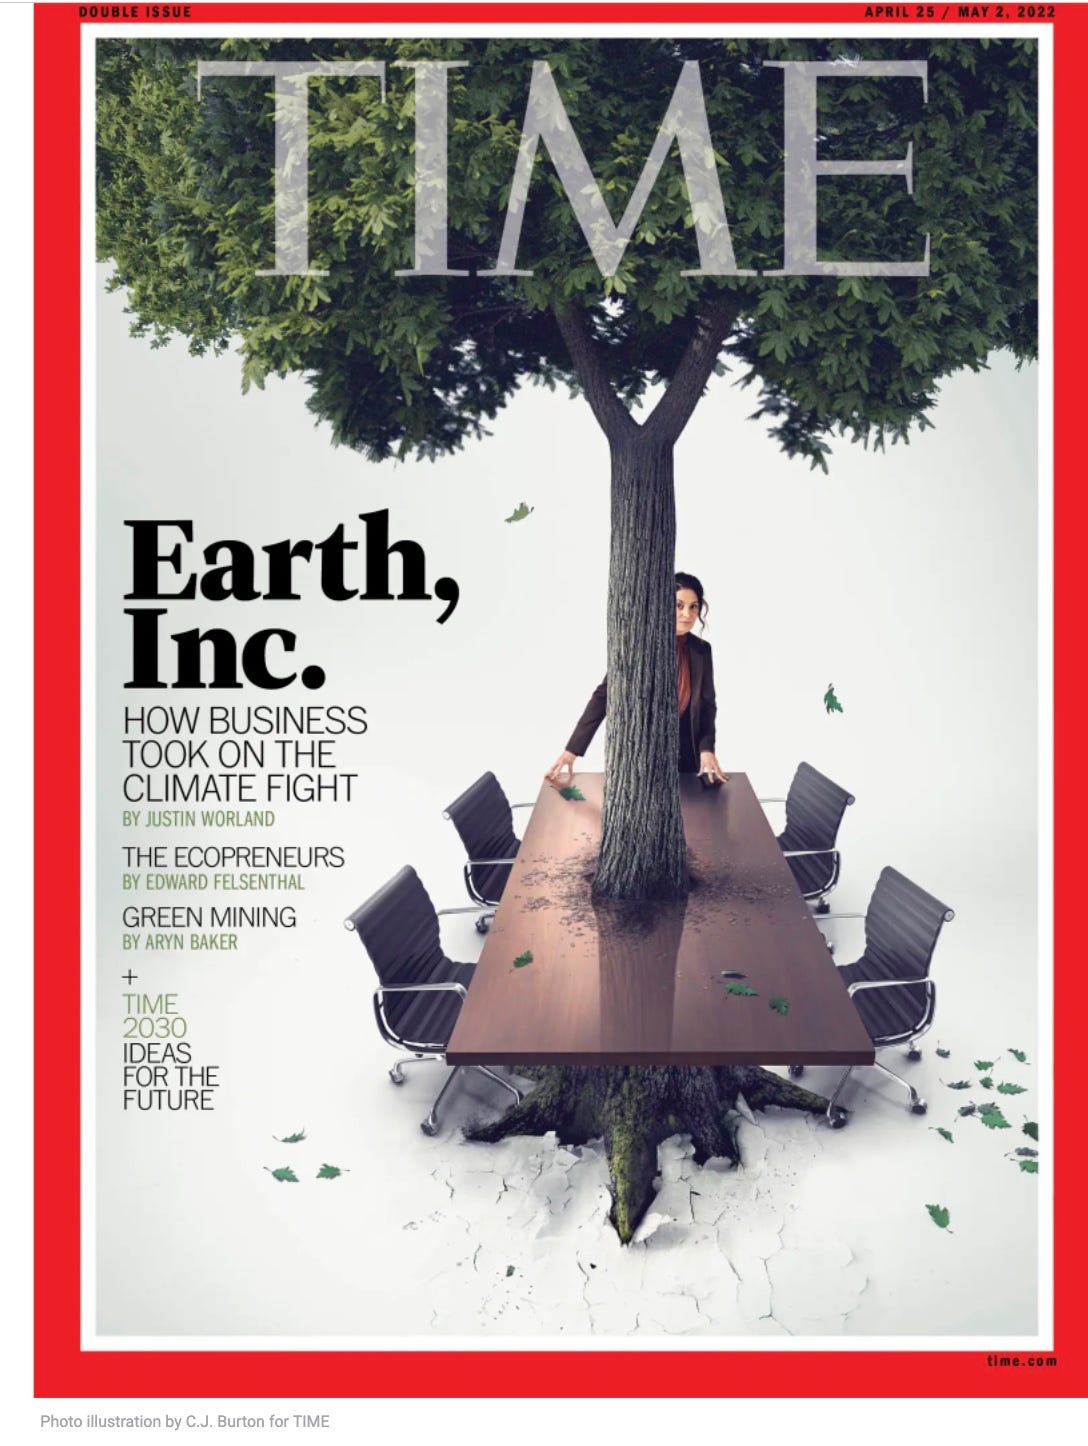 Cover of the latest Time magazine: "Earth, Inc."